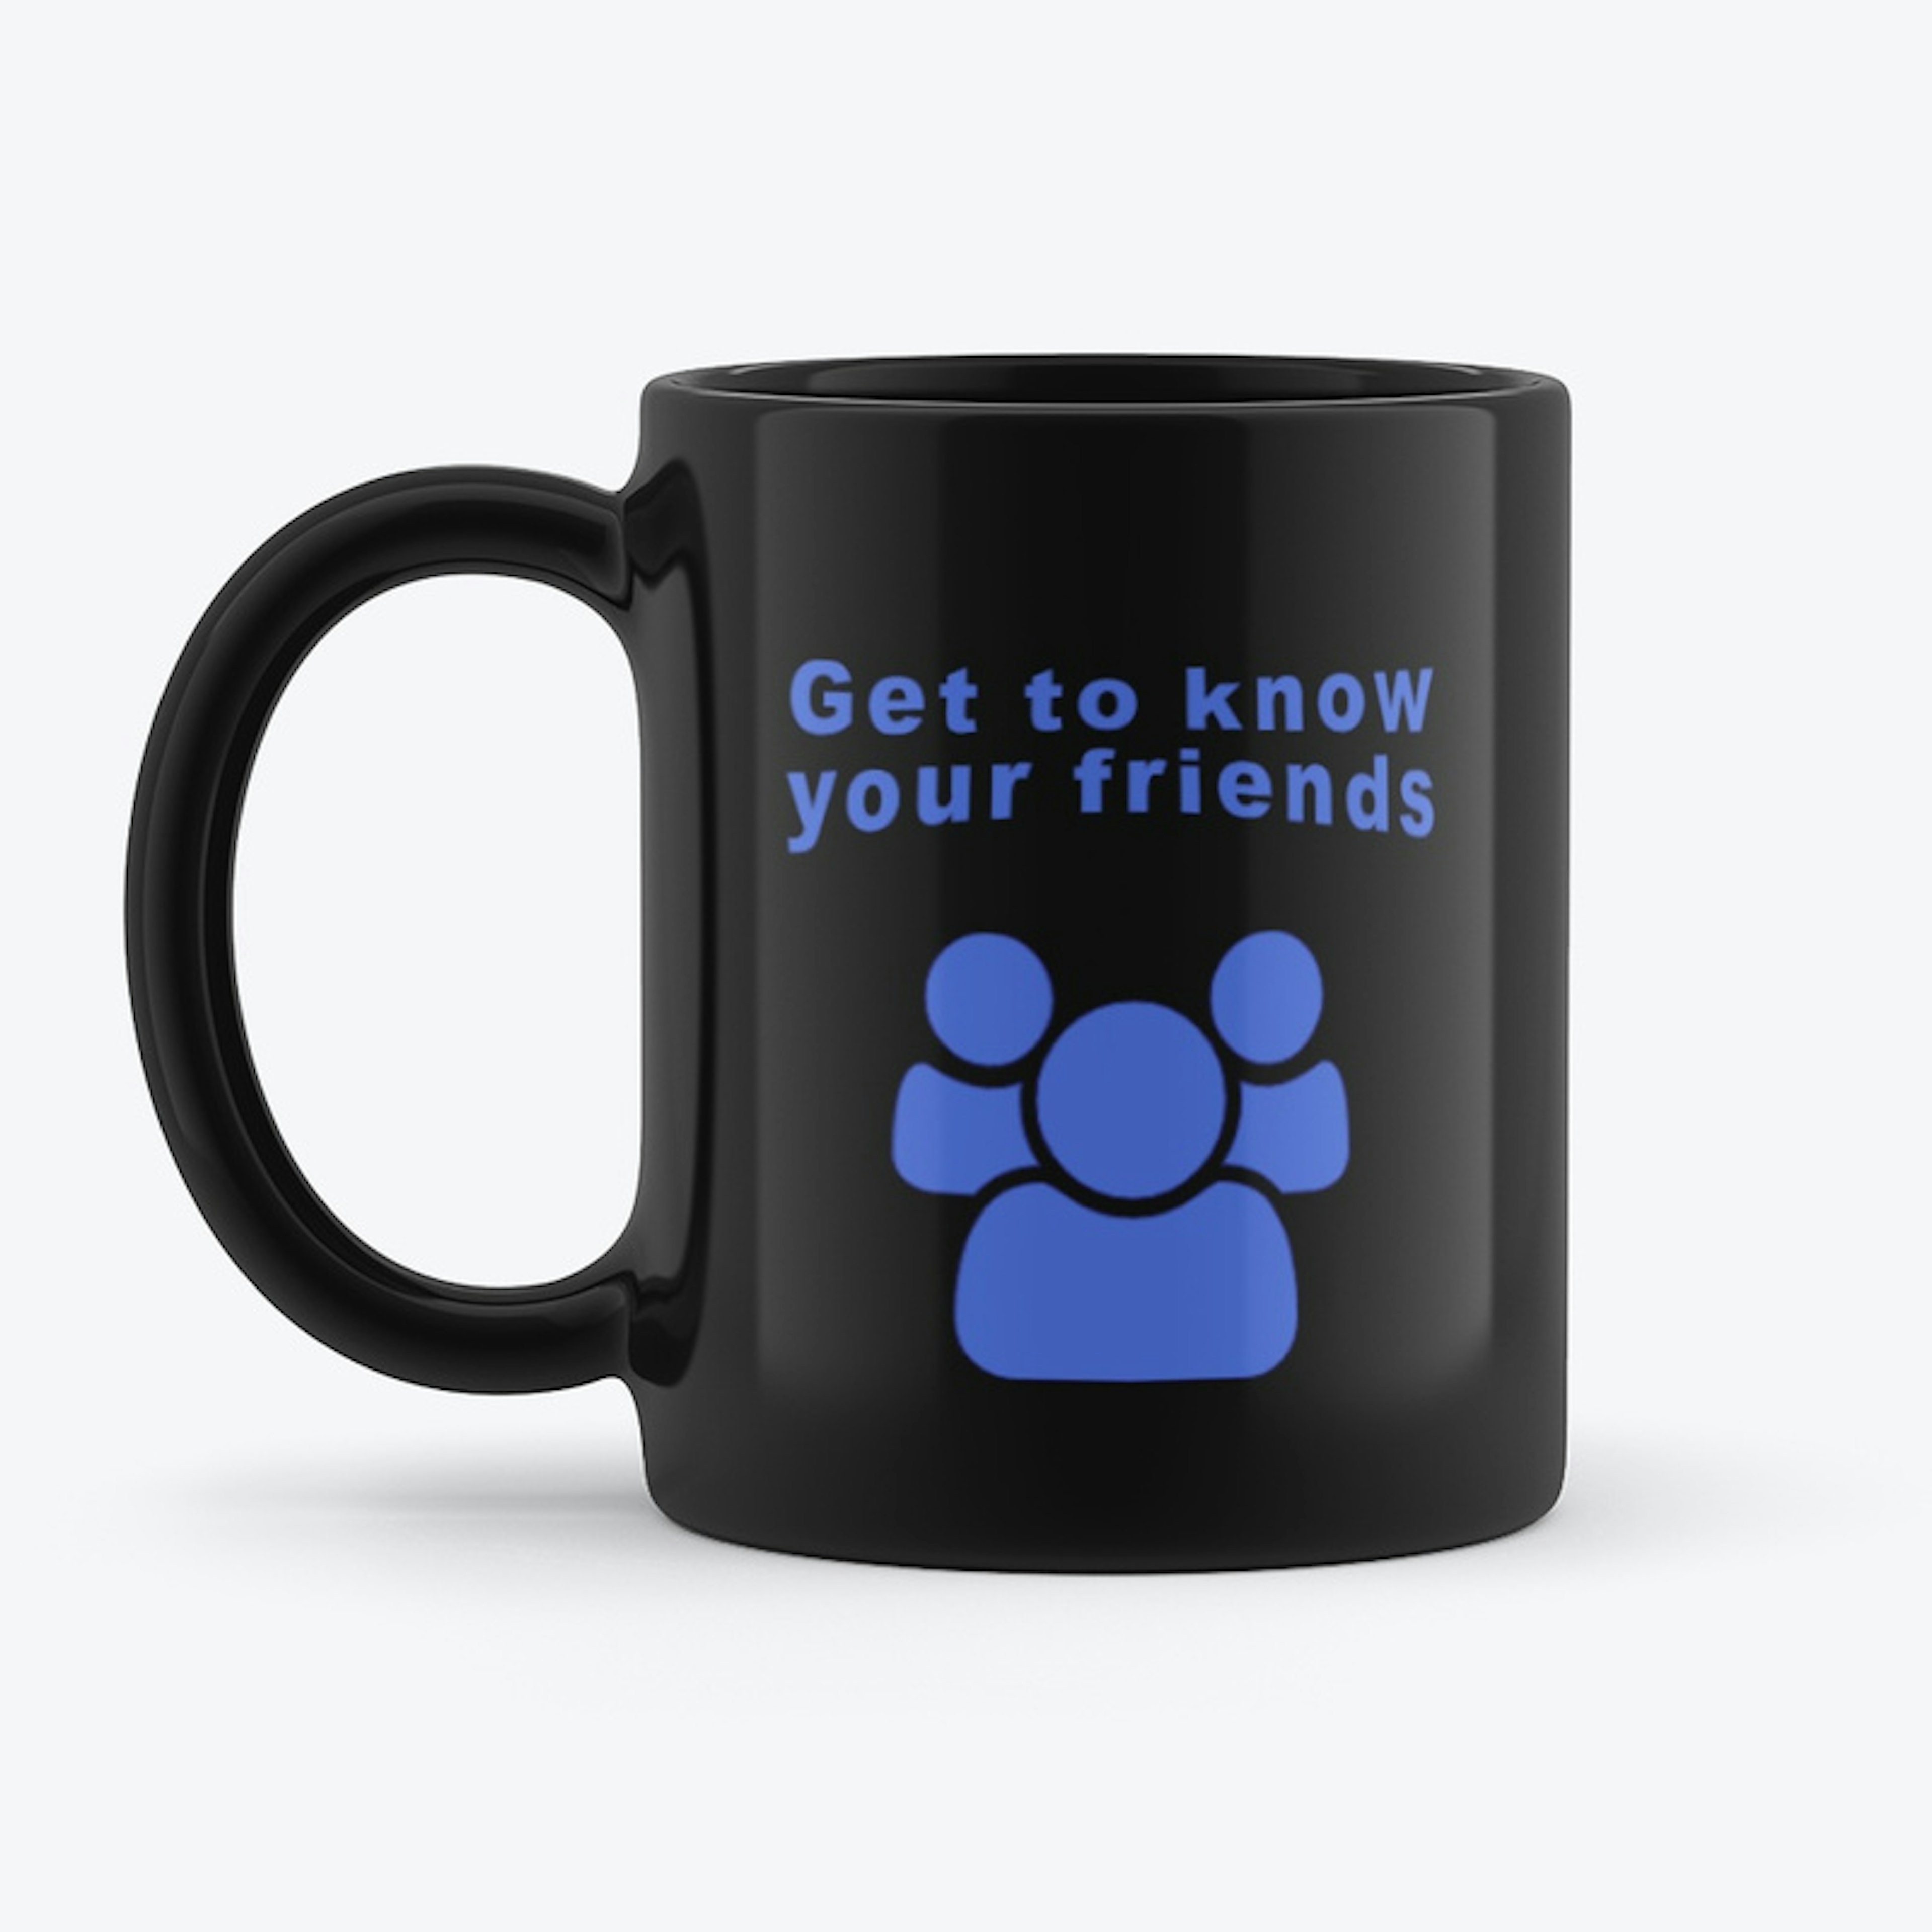 Get to know your friends coffee mug